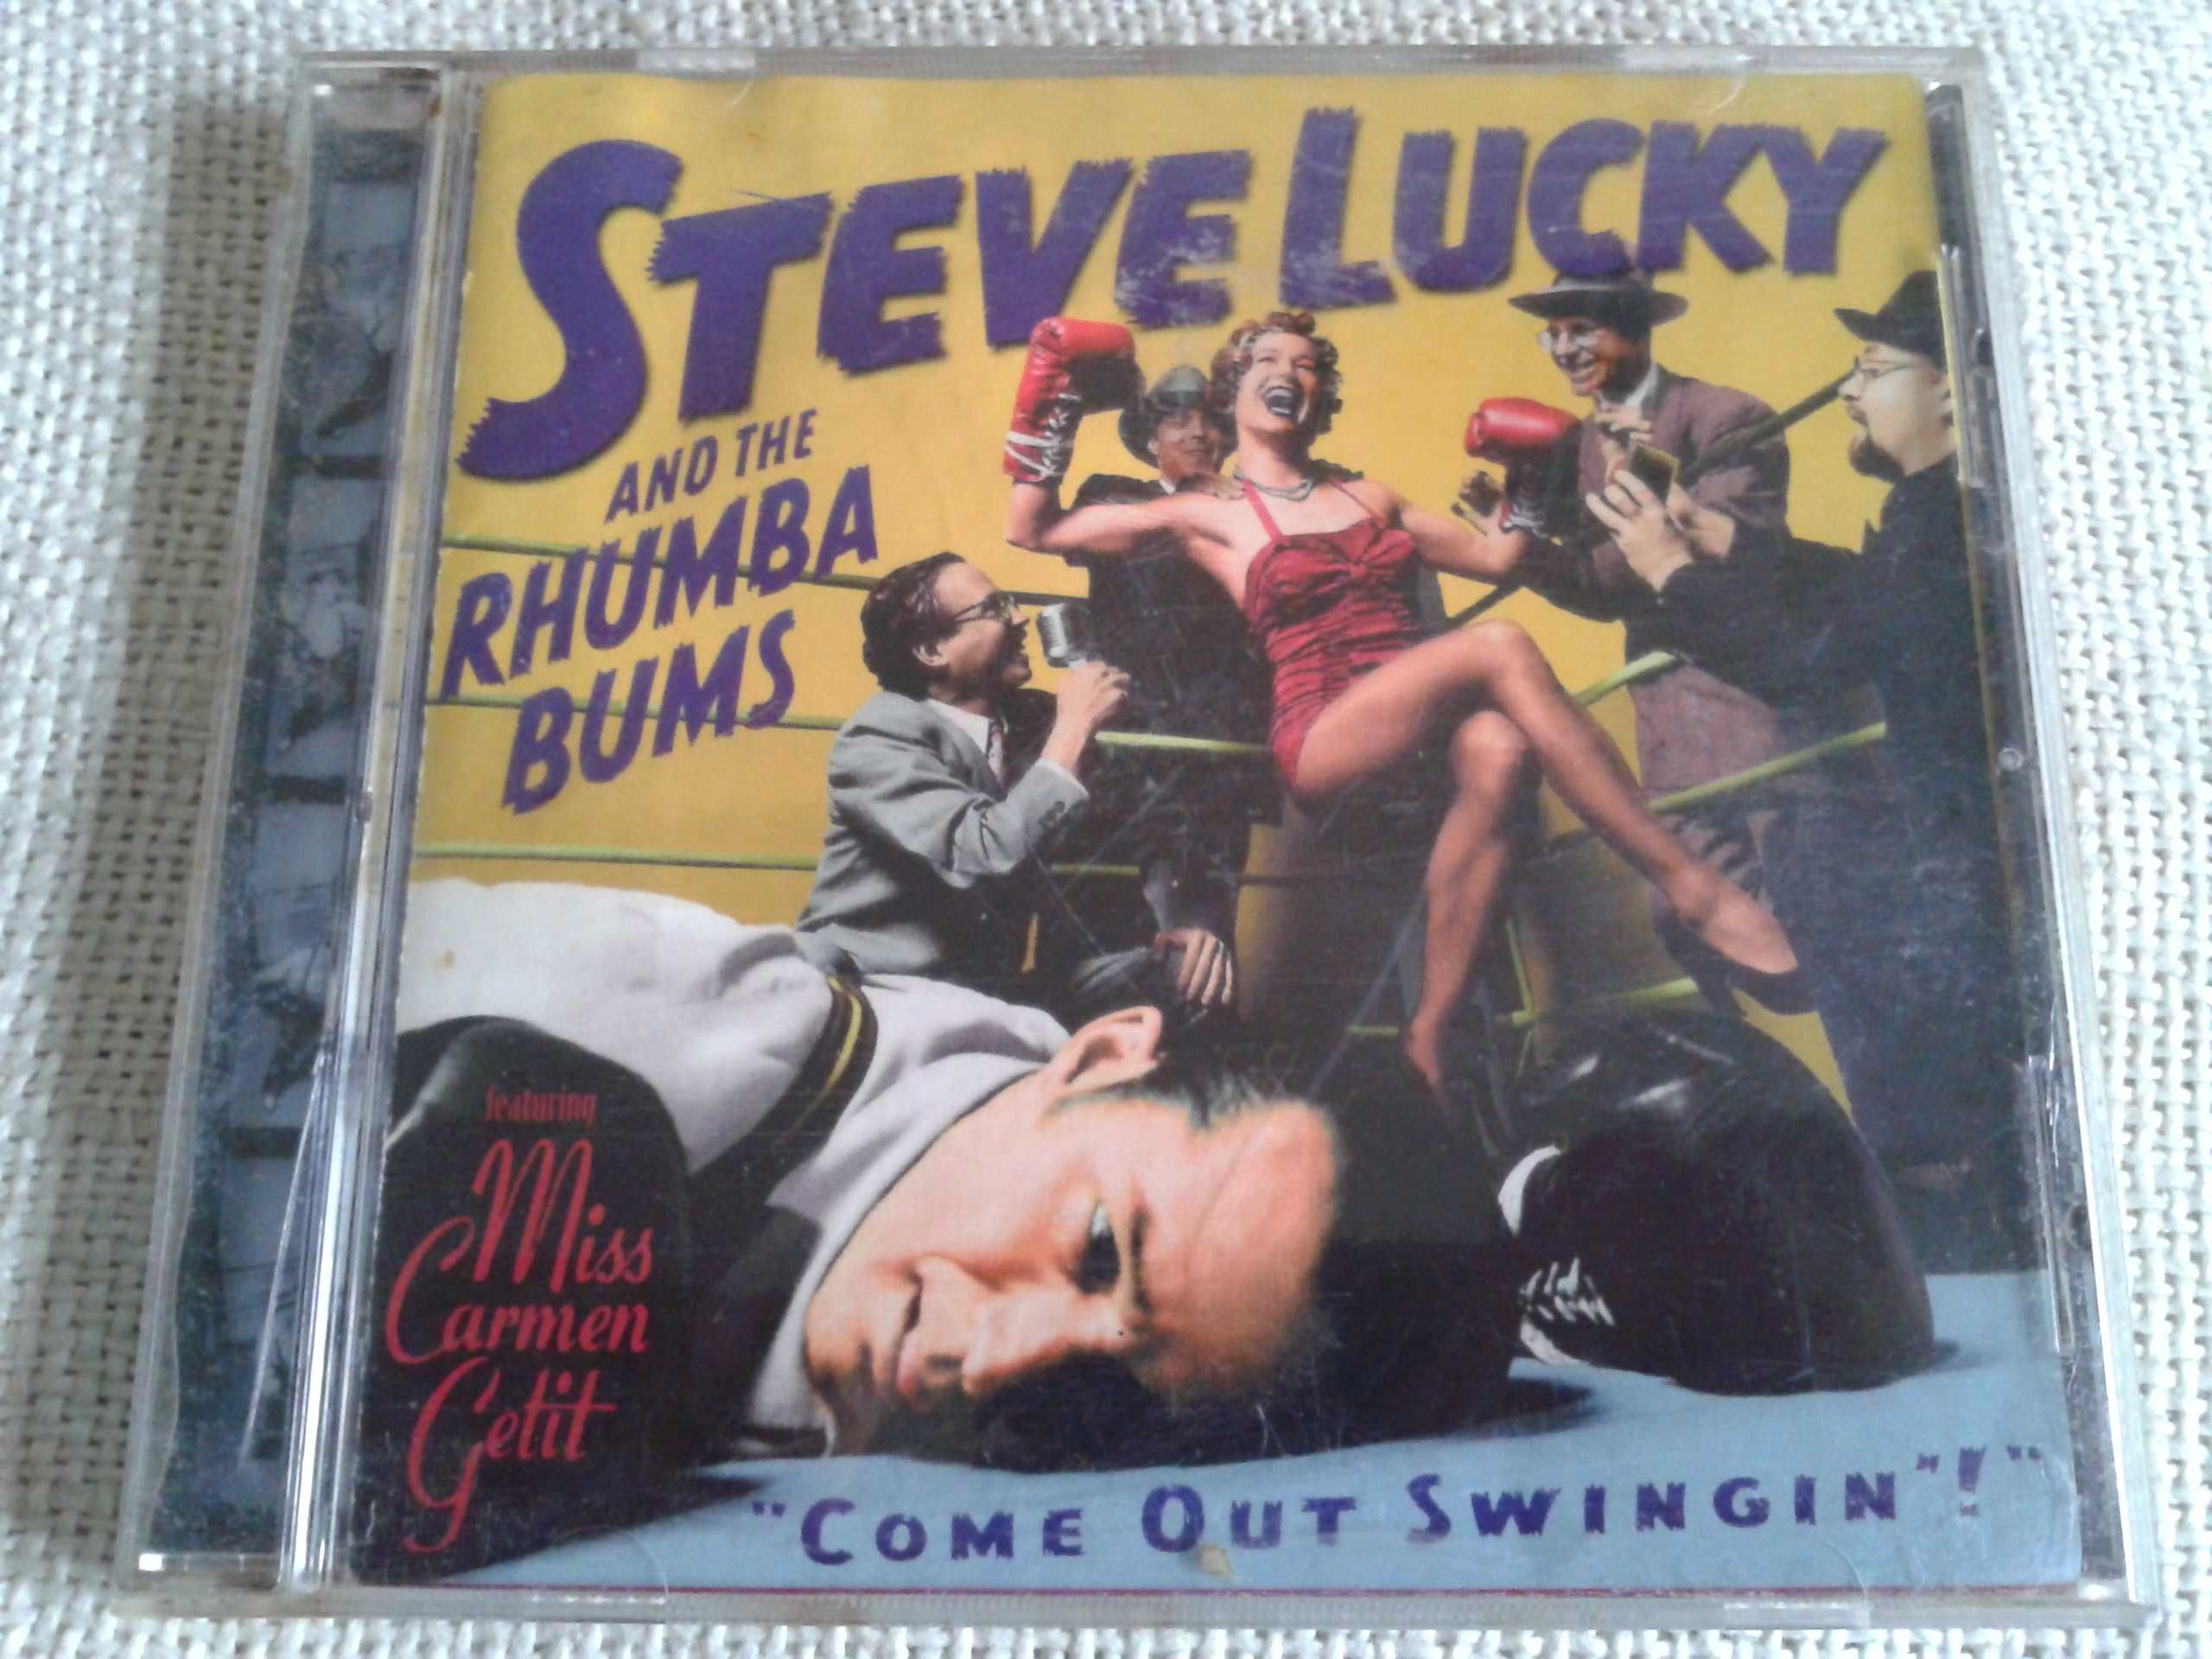 Steve Lucky & the Rhumba Bums - Come Out Swingin   CD